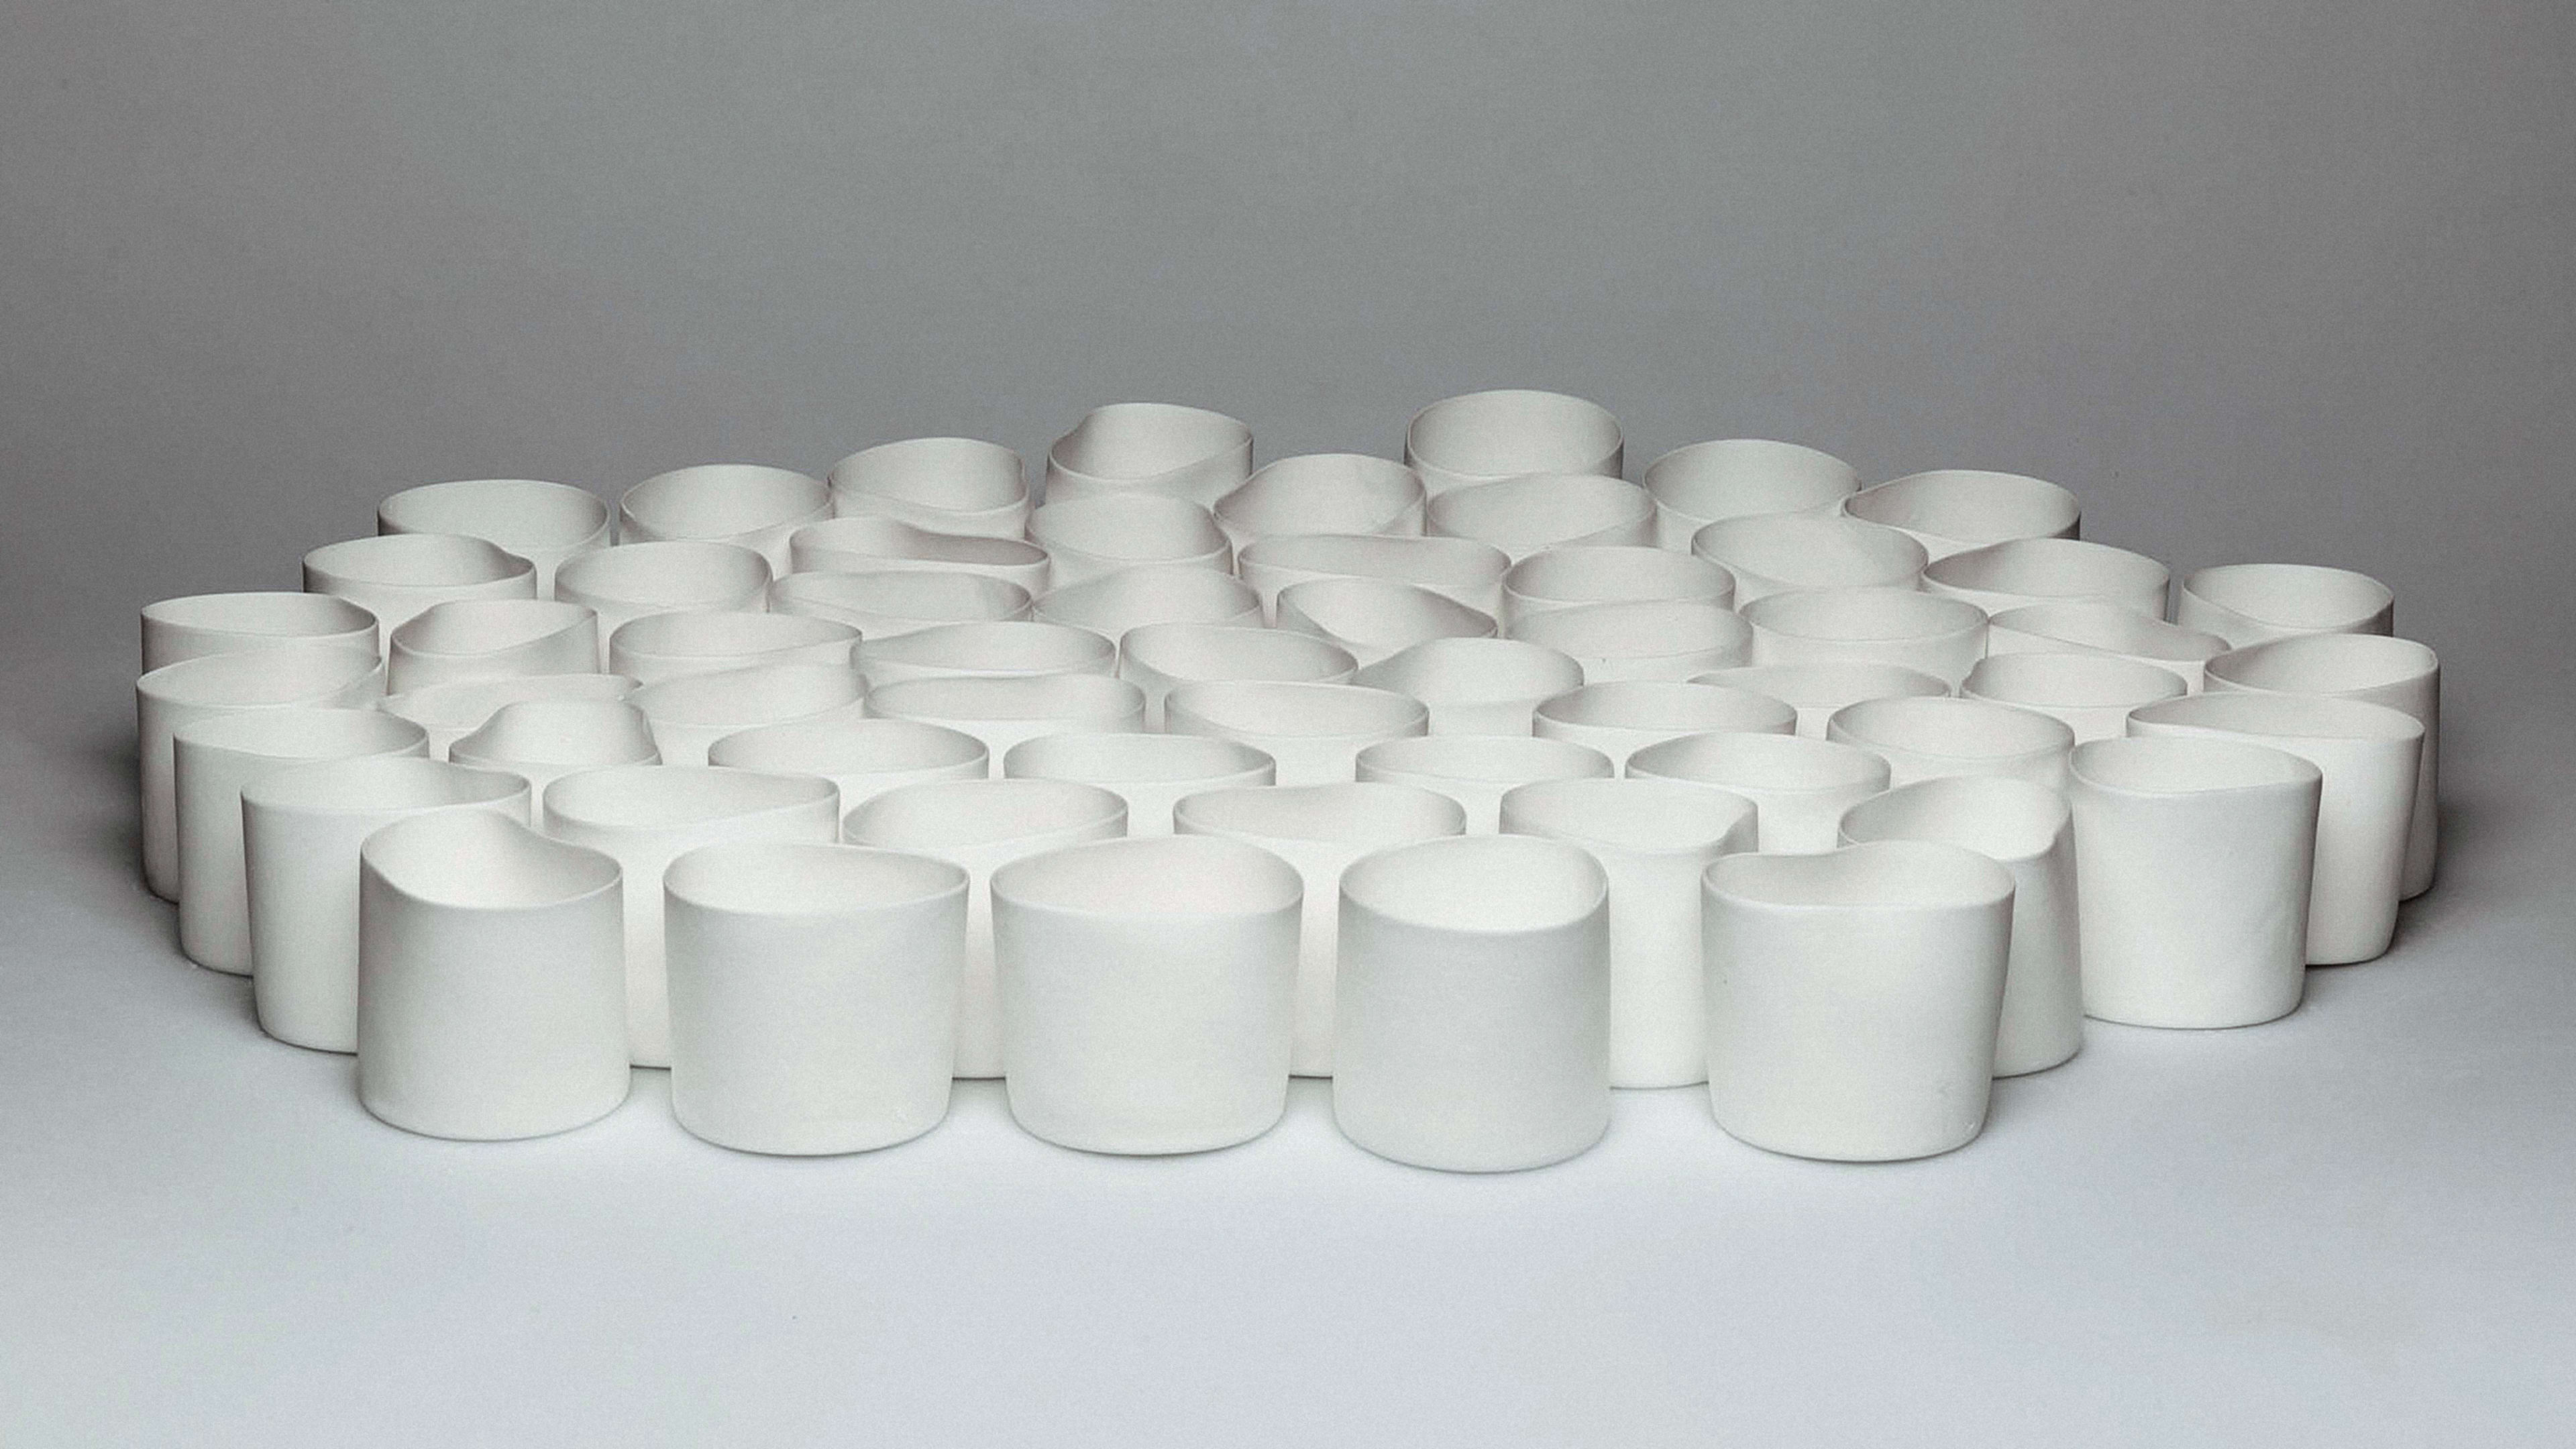 These sustainably designed ceramics are made from cow bones